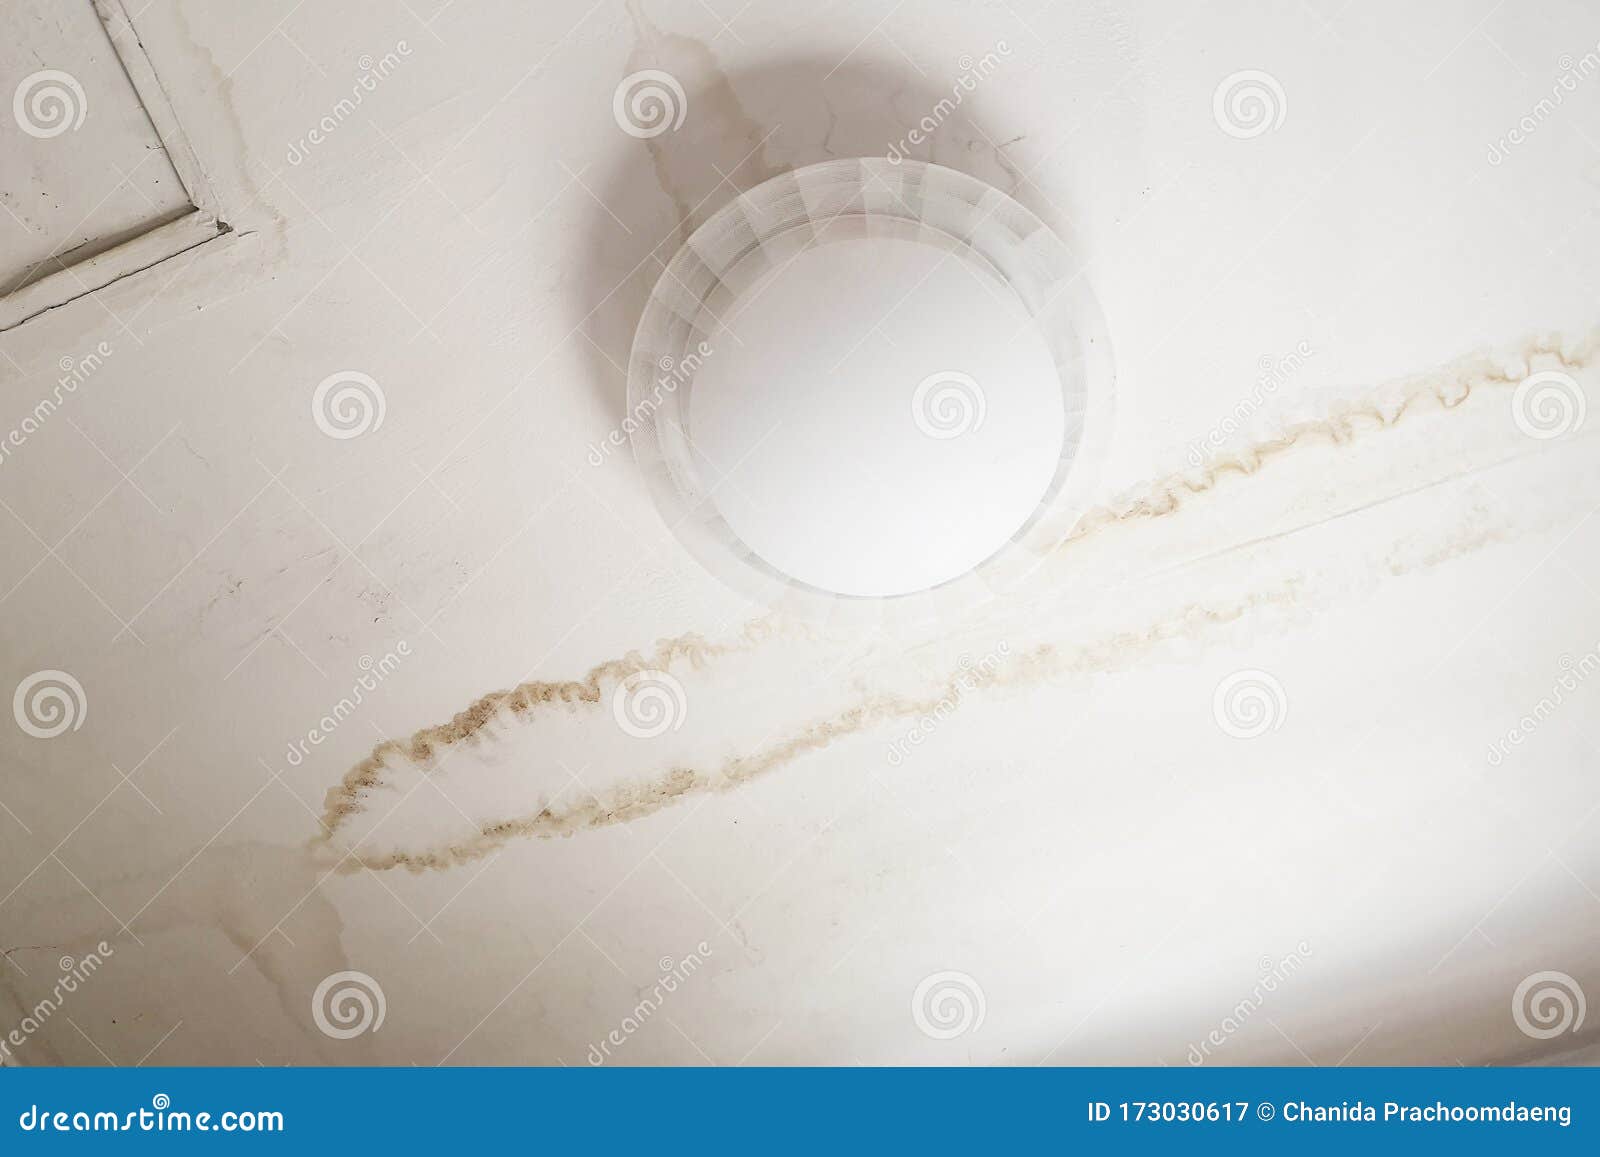 rain water leaks on the ceiling causing damage, tiles and gypsum board.